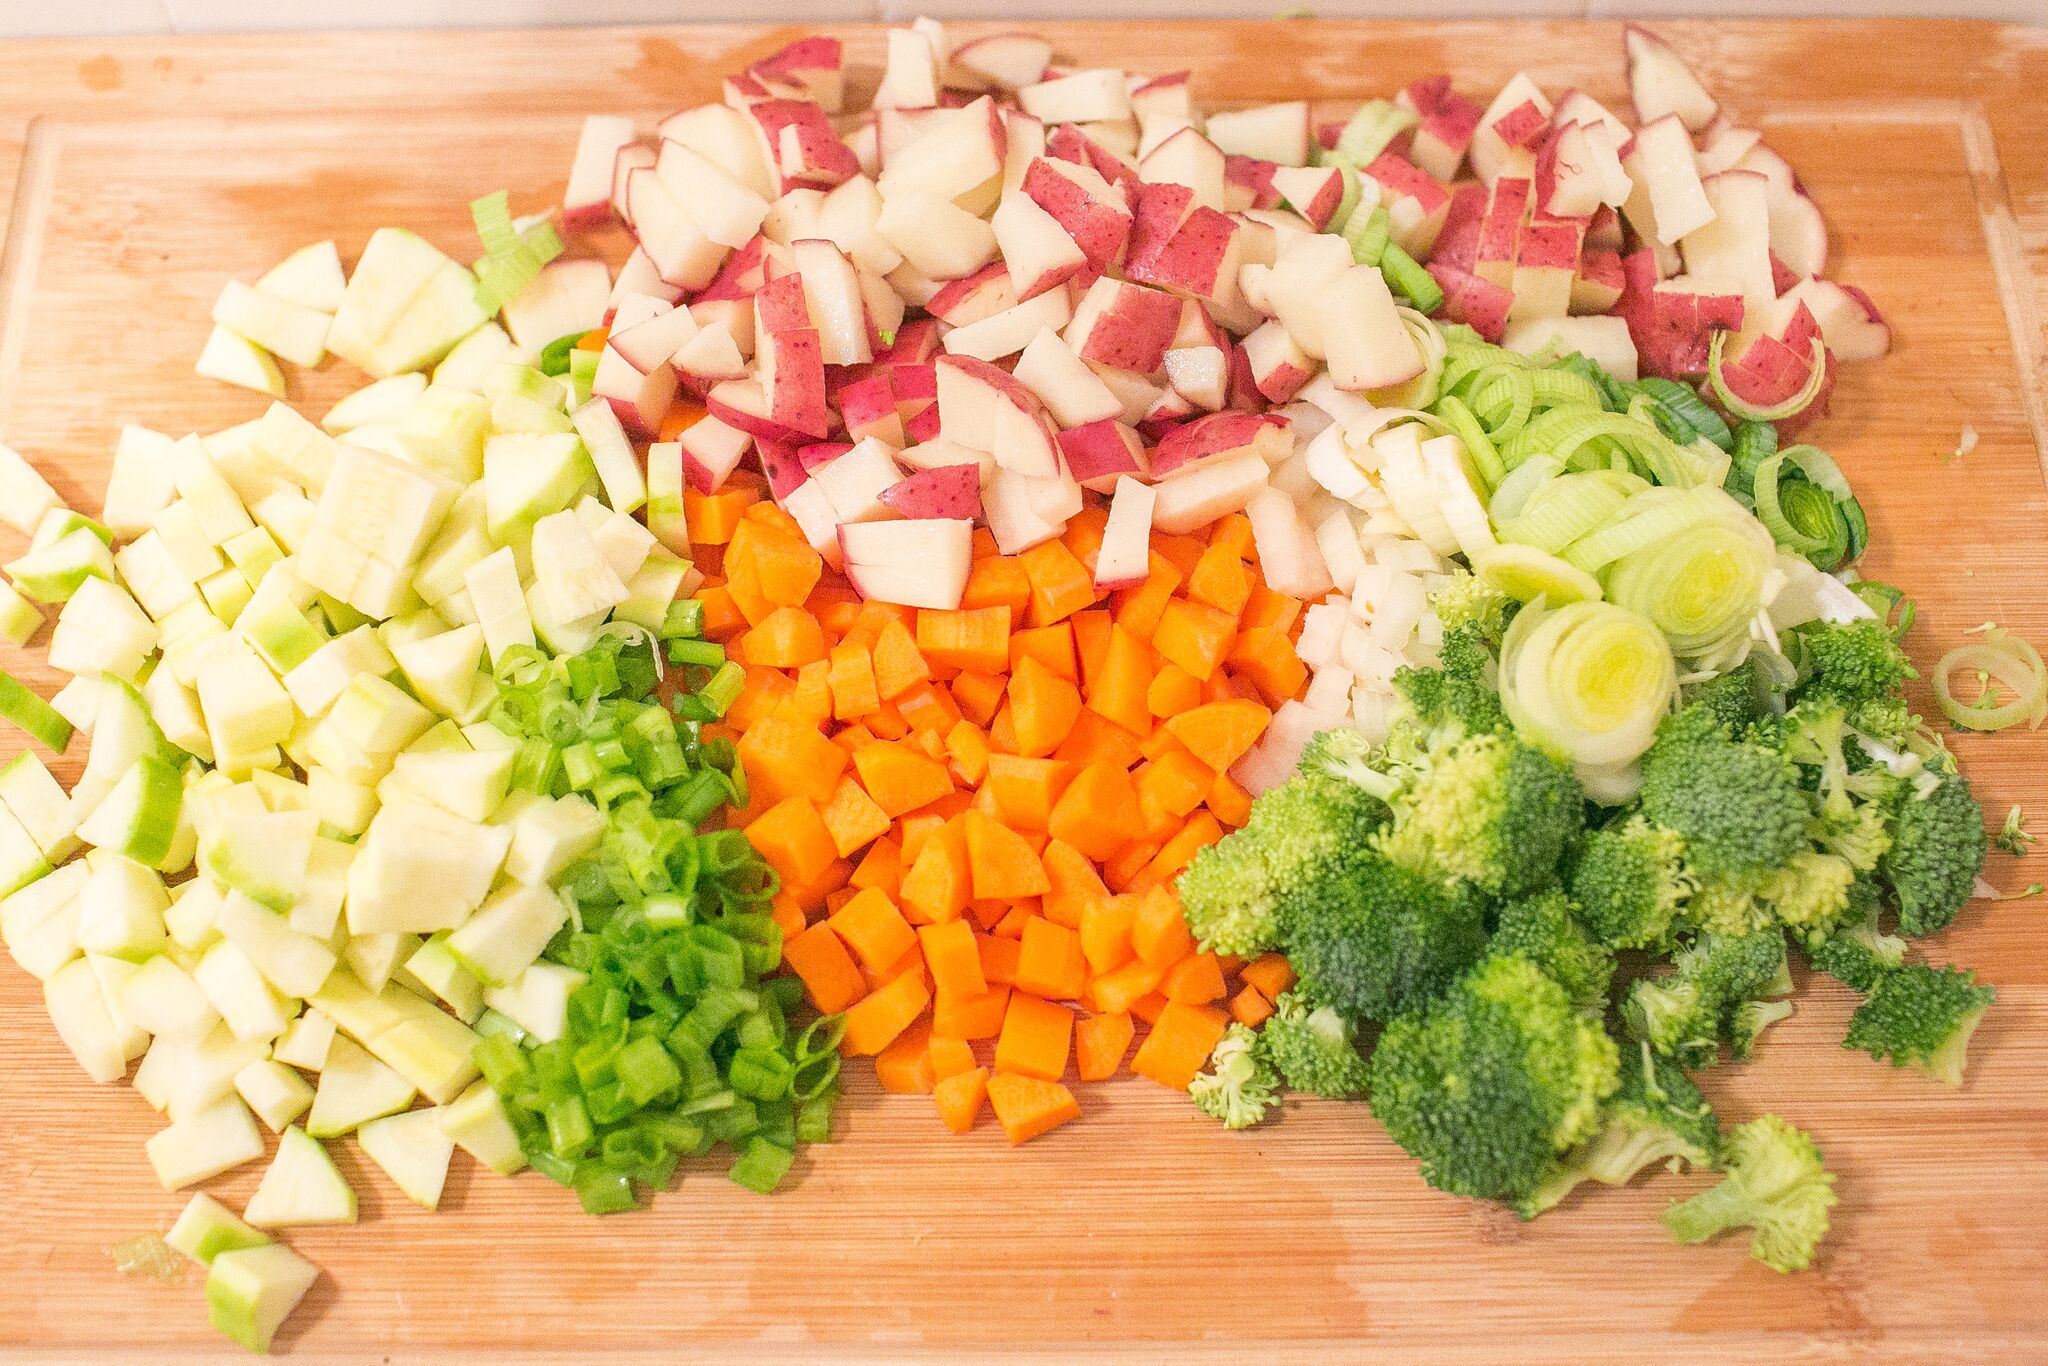 Chop all veggies into bite sized pieces